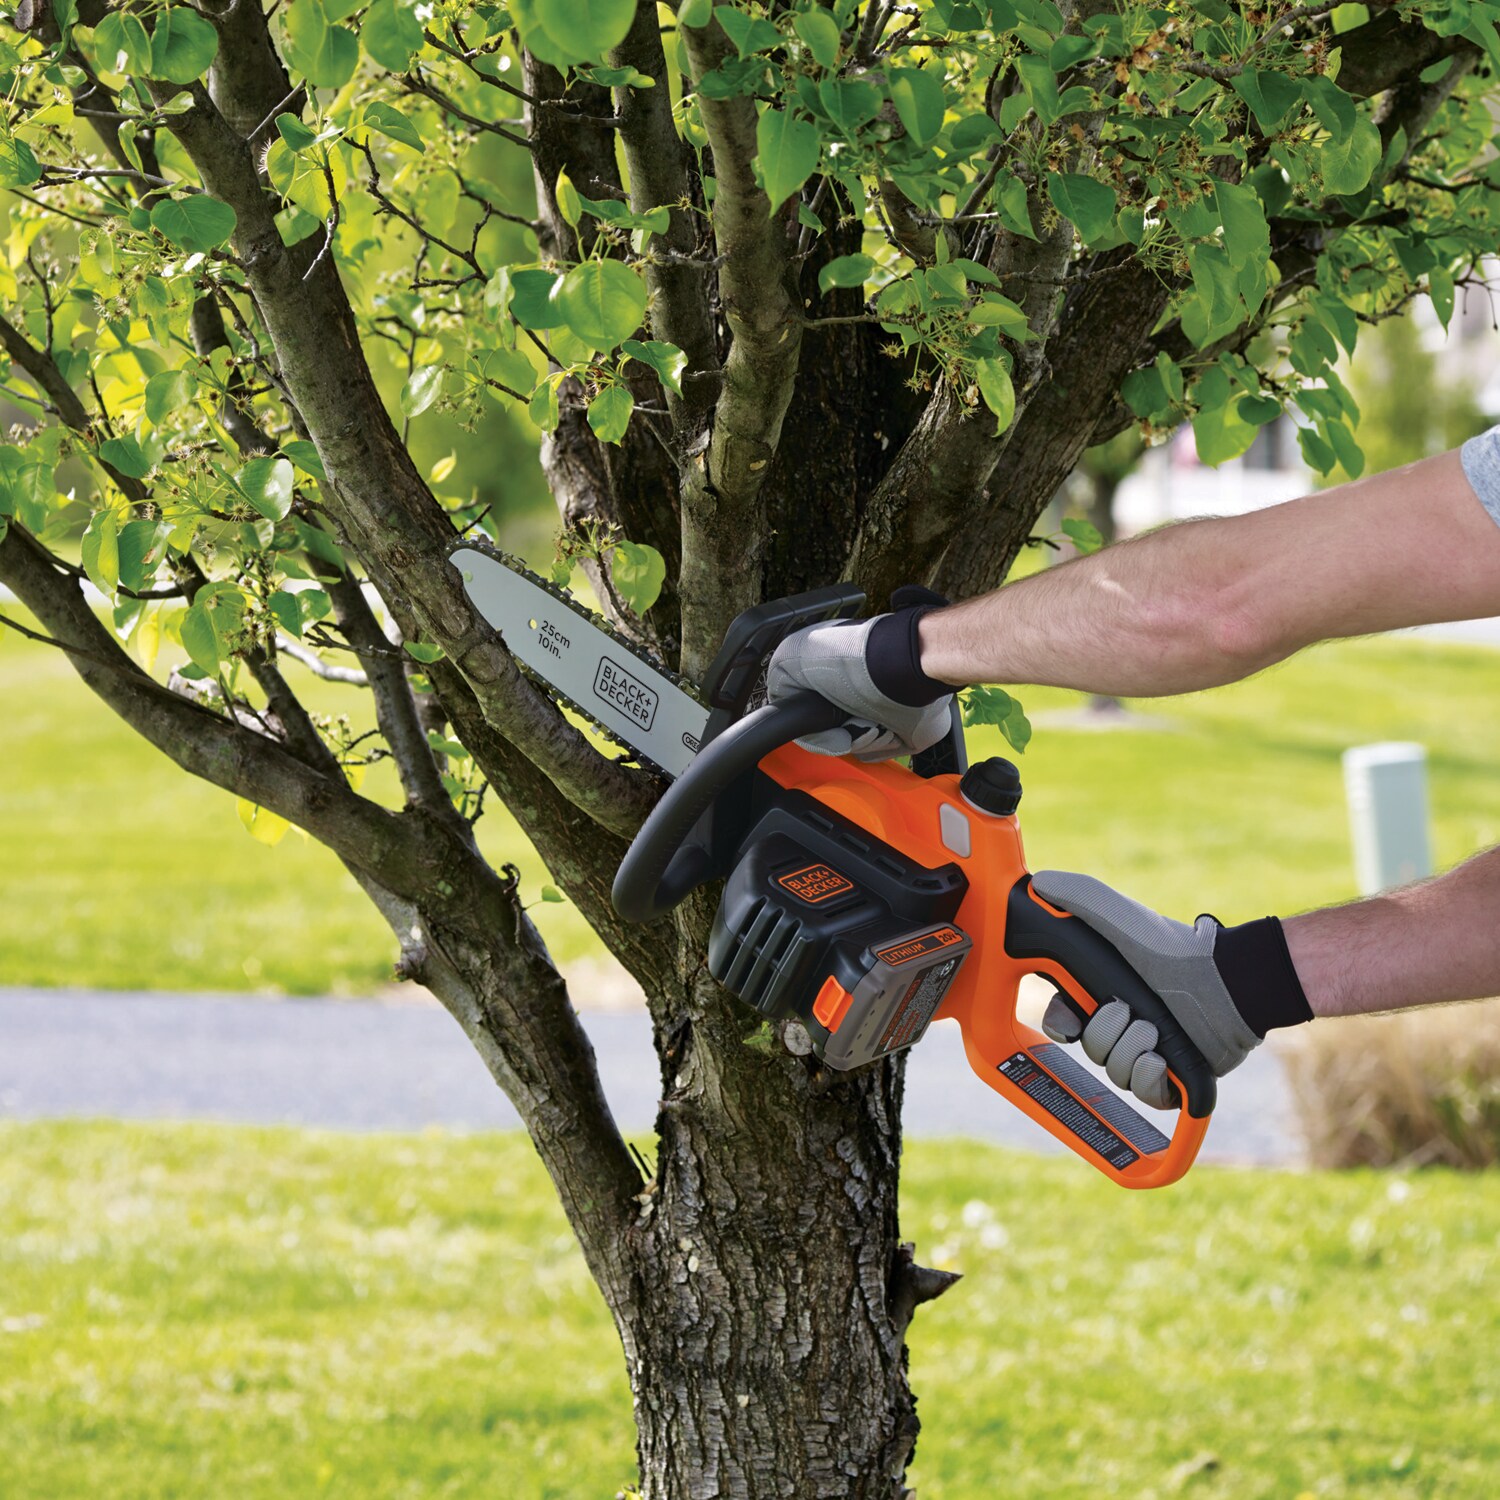 Shop BLACK+DECKER 20-volt Max 3/8-in Cordless Drill (1-Battery Included and  Charger Included) & 20-volt Max 10-in Cordless Electric Chainsaw 2 Ah ( Battery & Charger Included) at